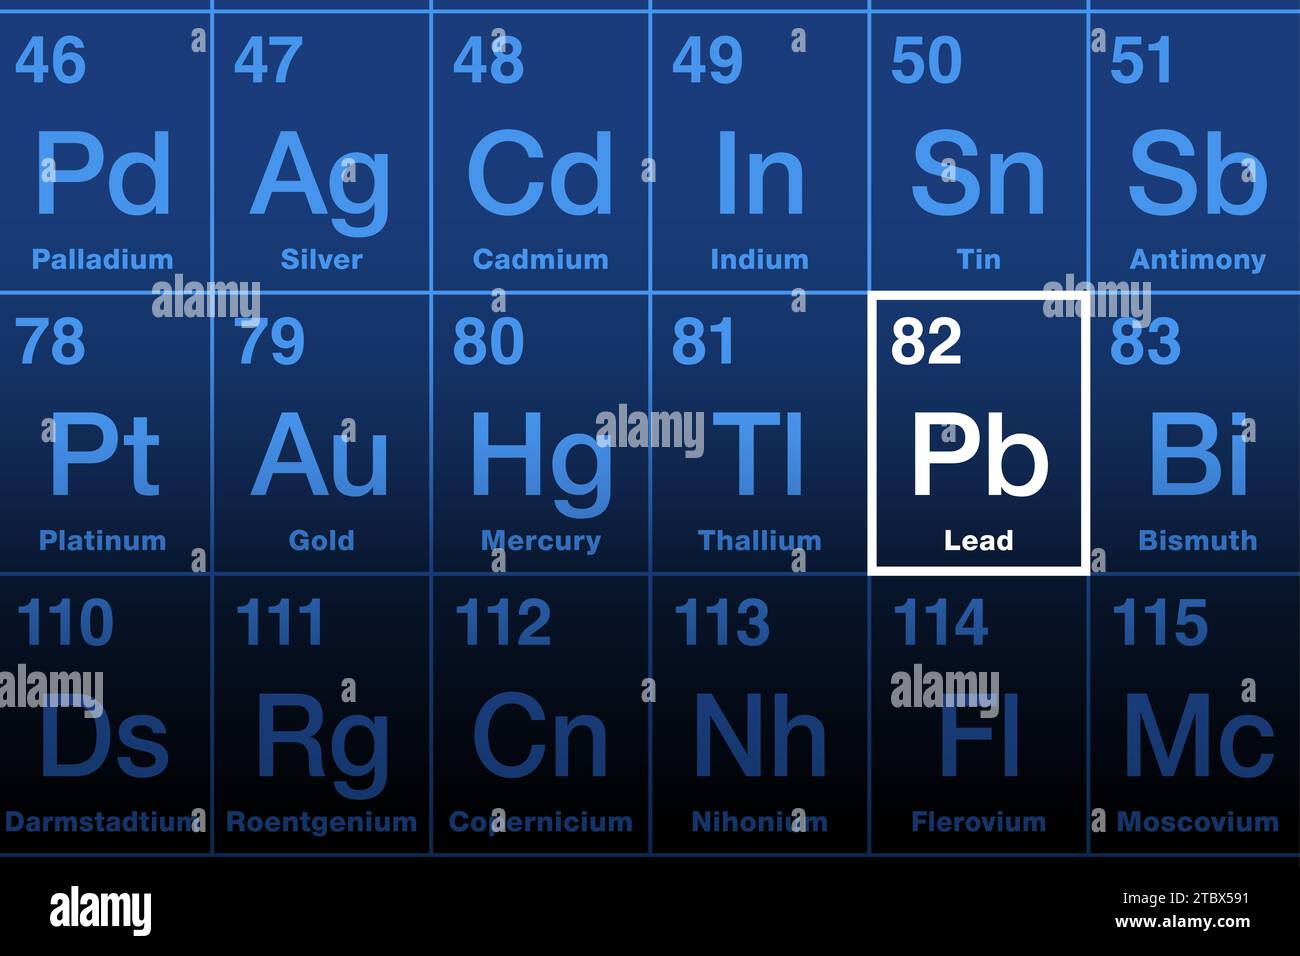 Lead on periodic table of the elements. Chemical element with symbol Pb for Latin plumbum, and atomic number 82. Soft, malleable heavy metal. Stock Photo